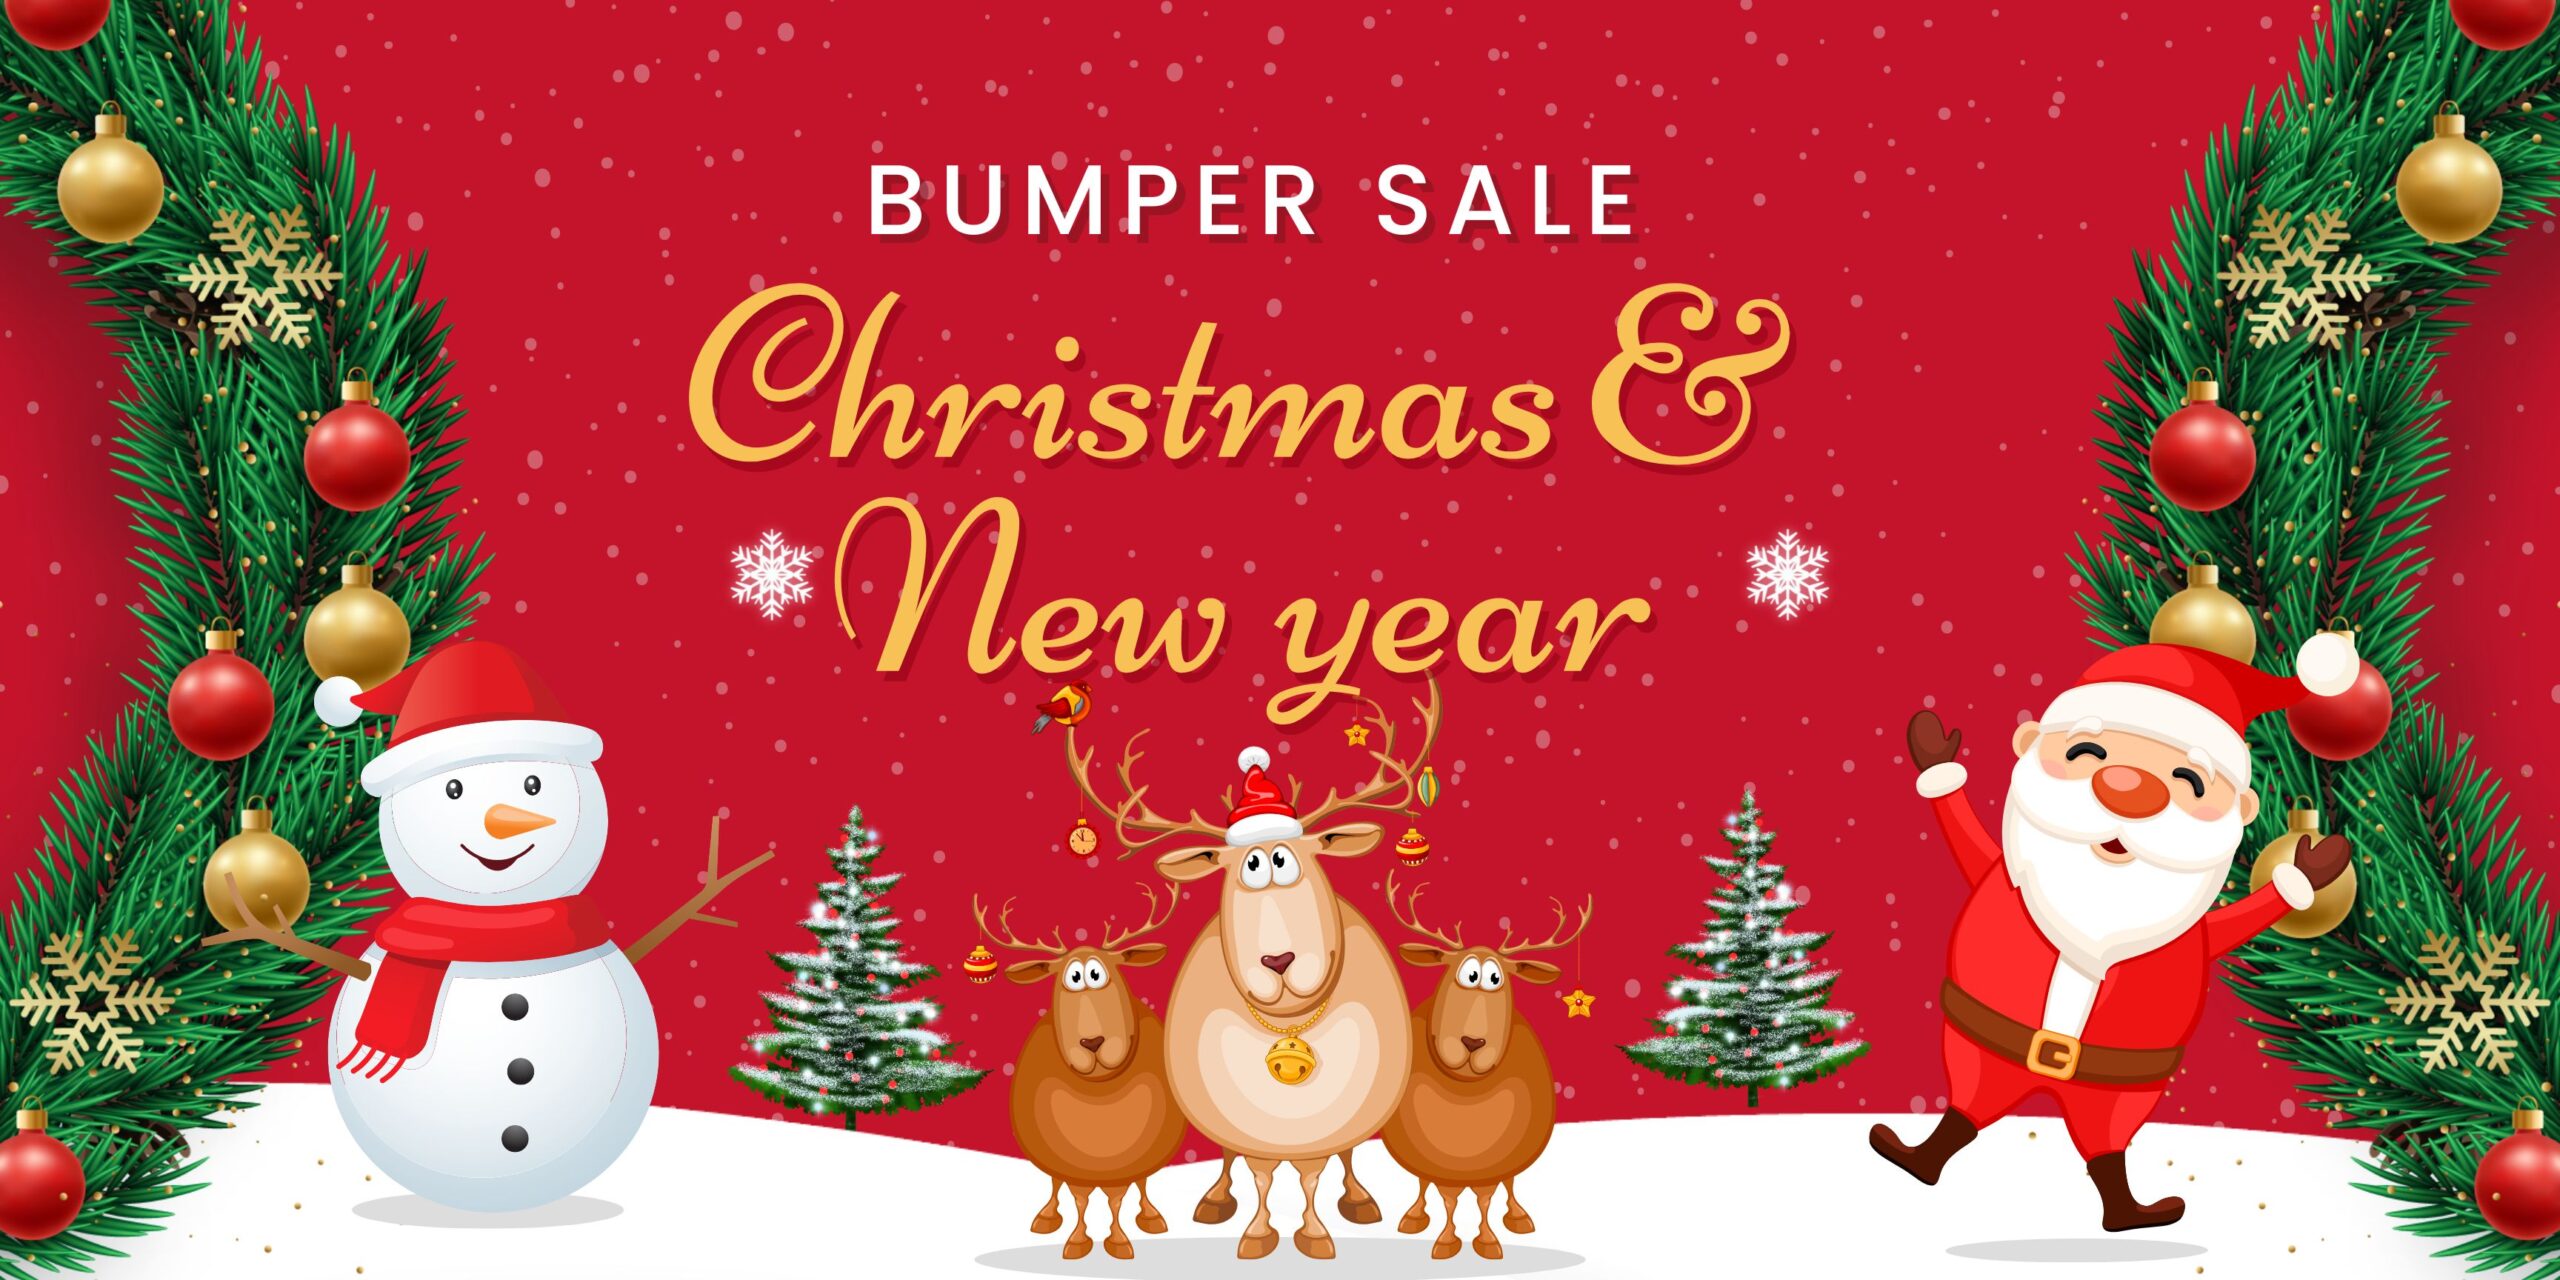 Christmas and new year 2022 bumper sale Aticue Decor Home Improvement